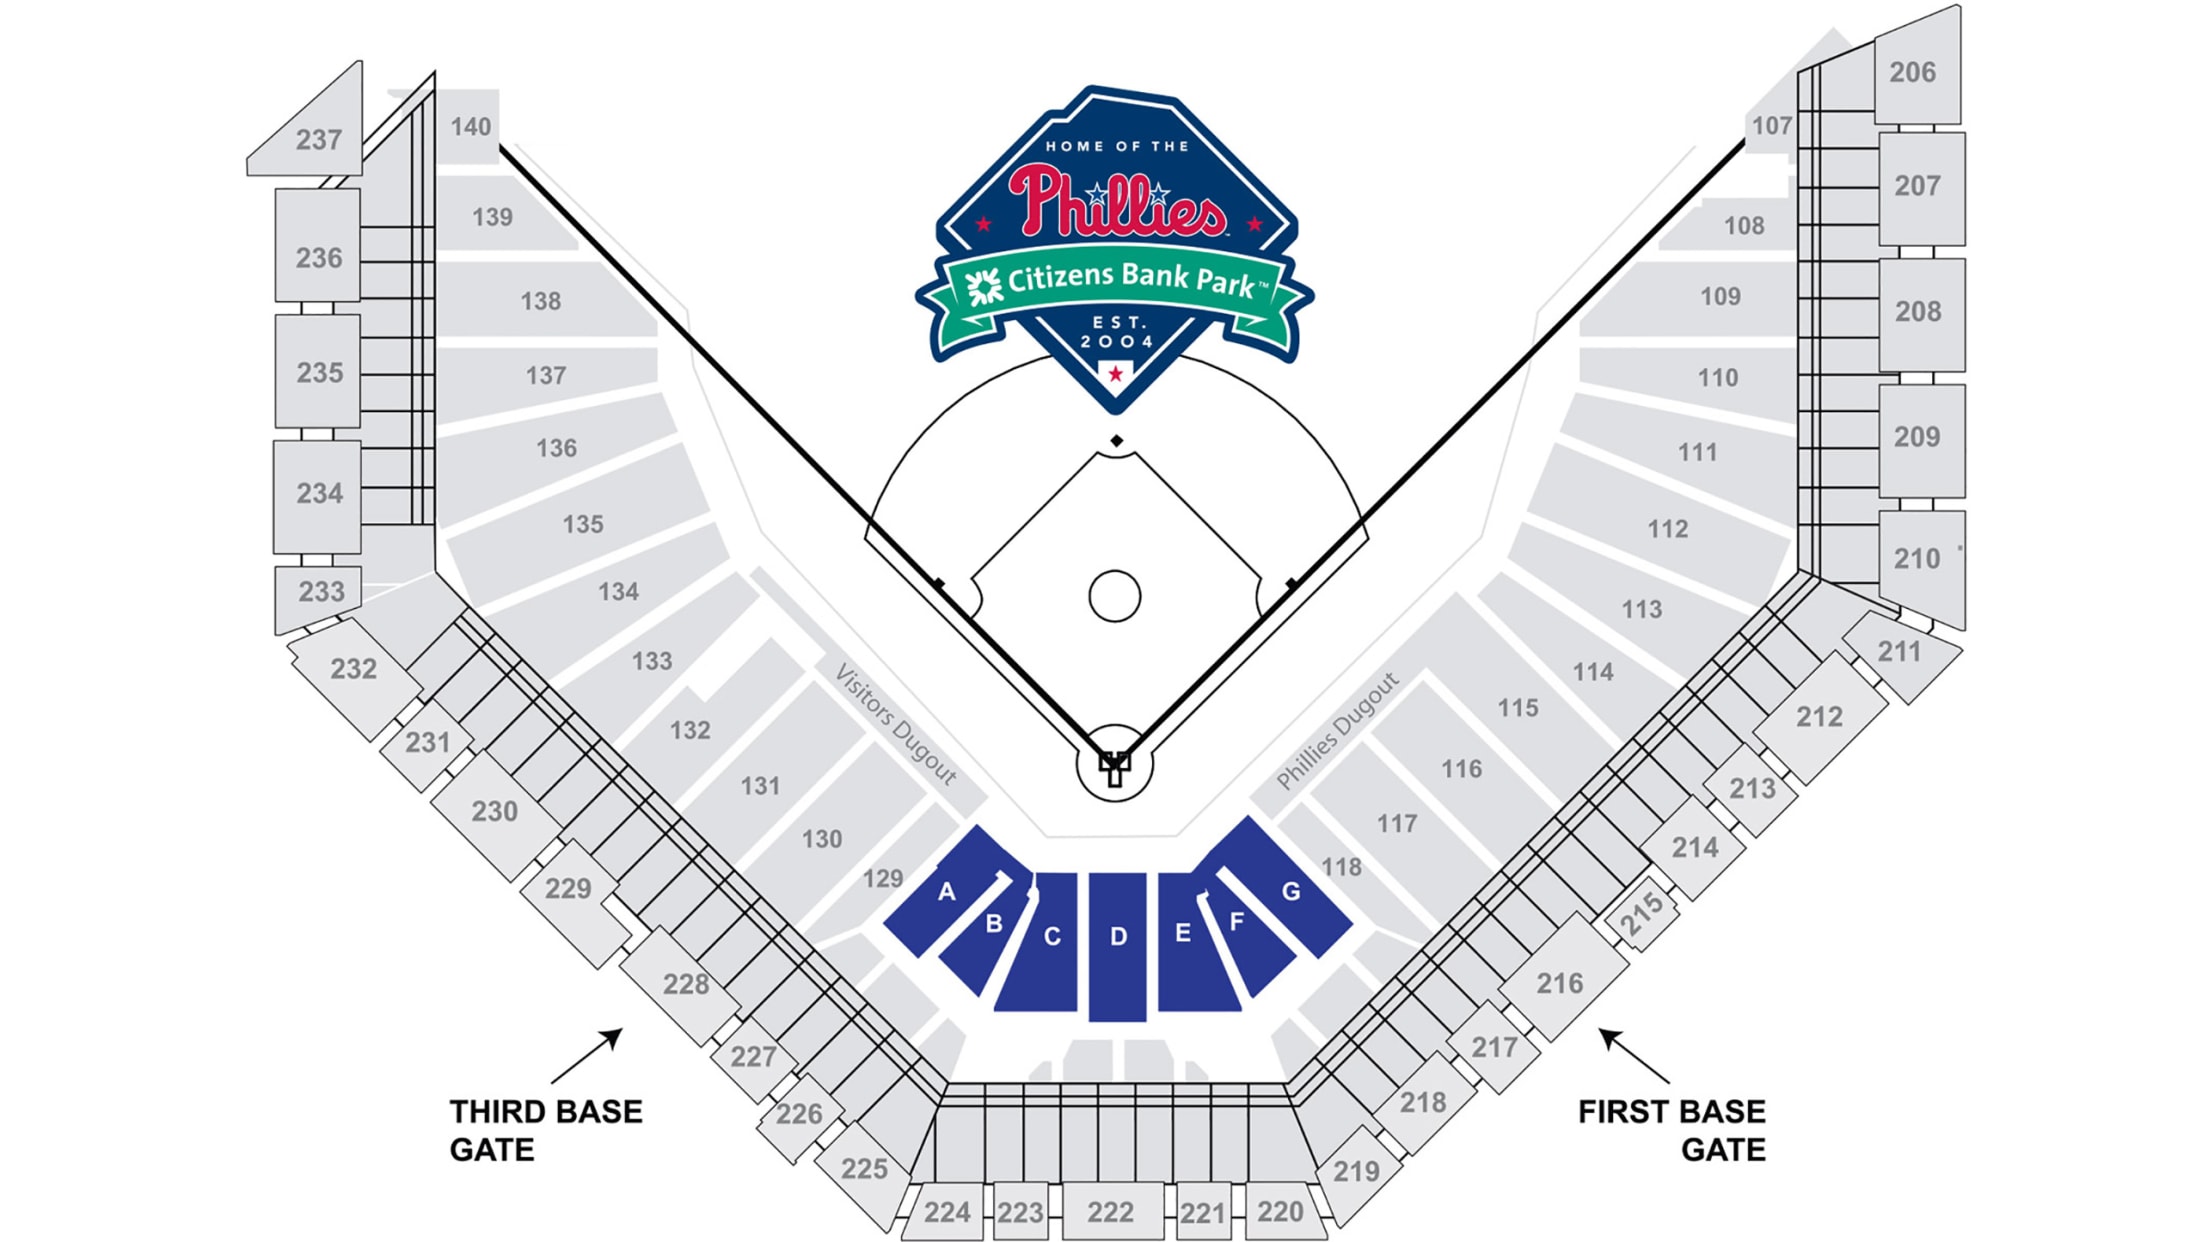 Citizens Bank Park Seating Chart With Row Numbers My Bios